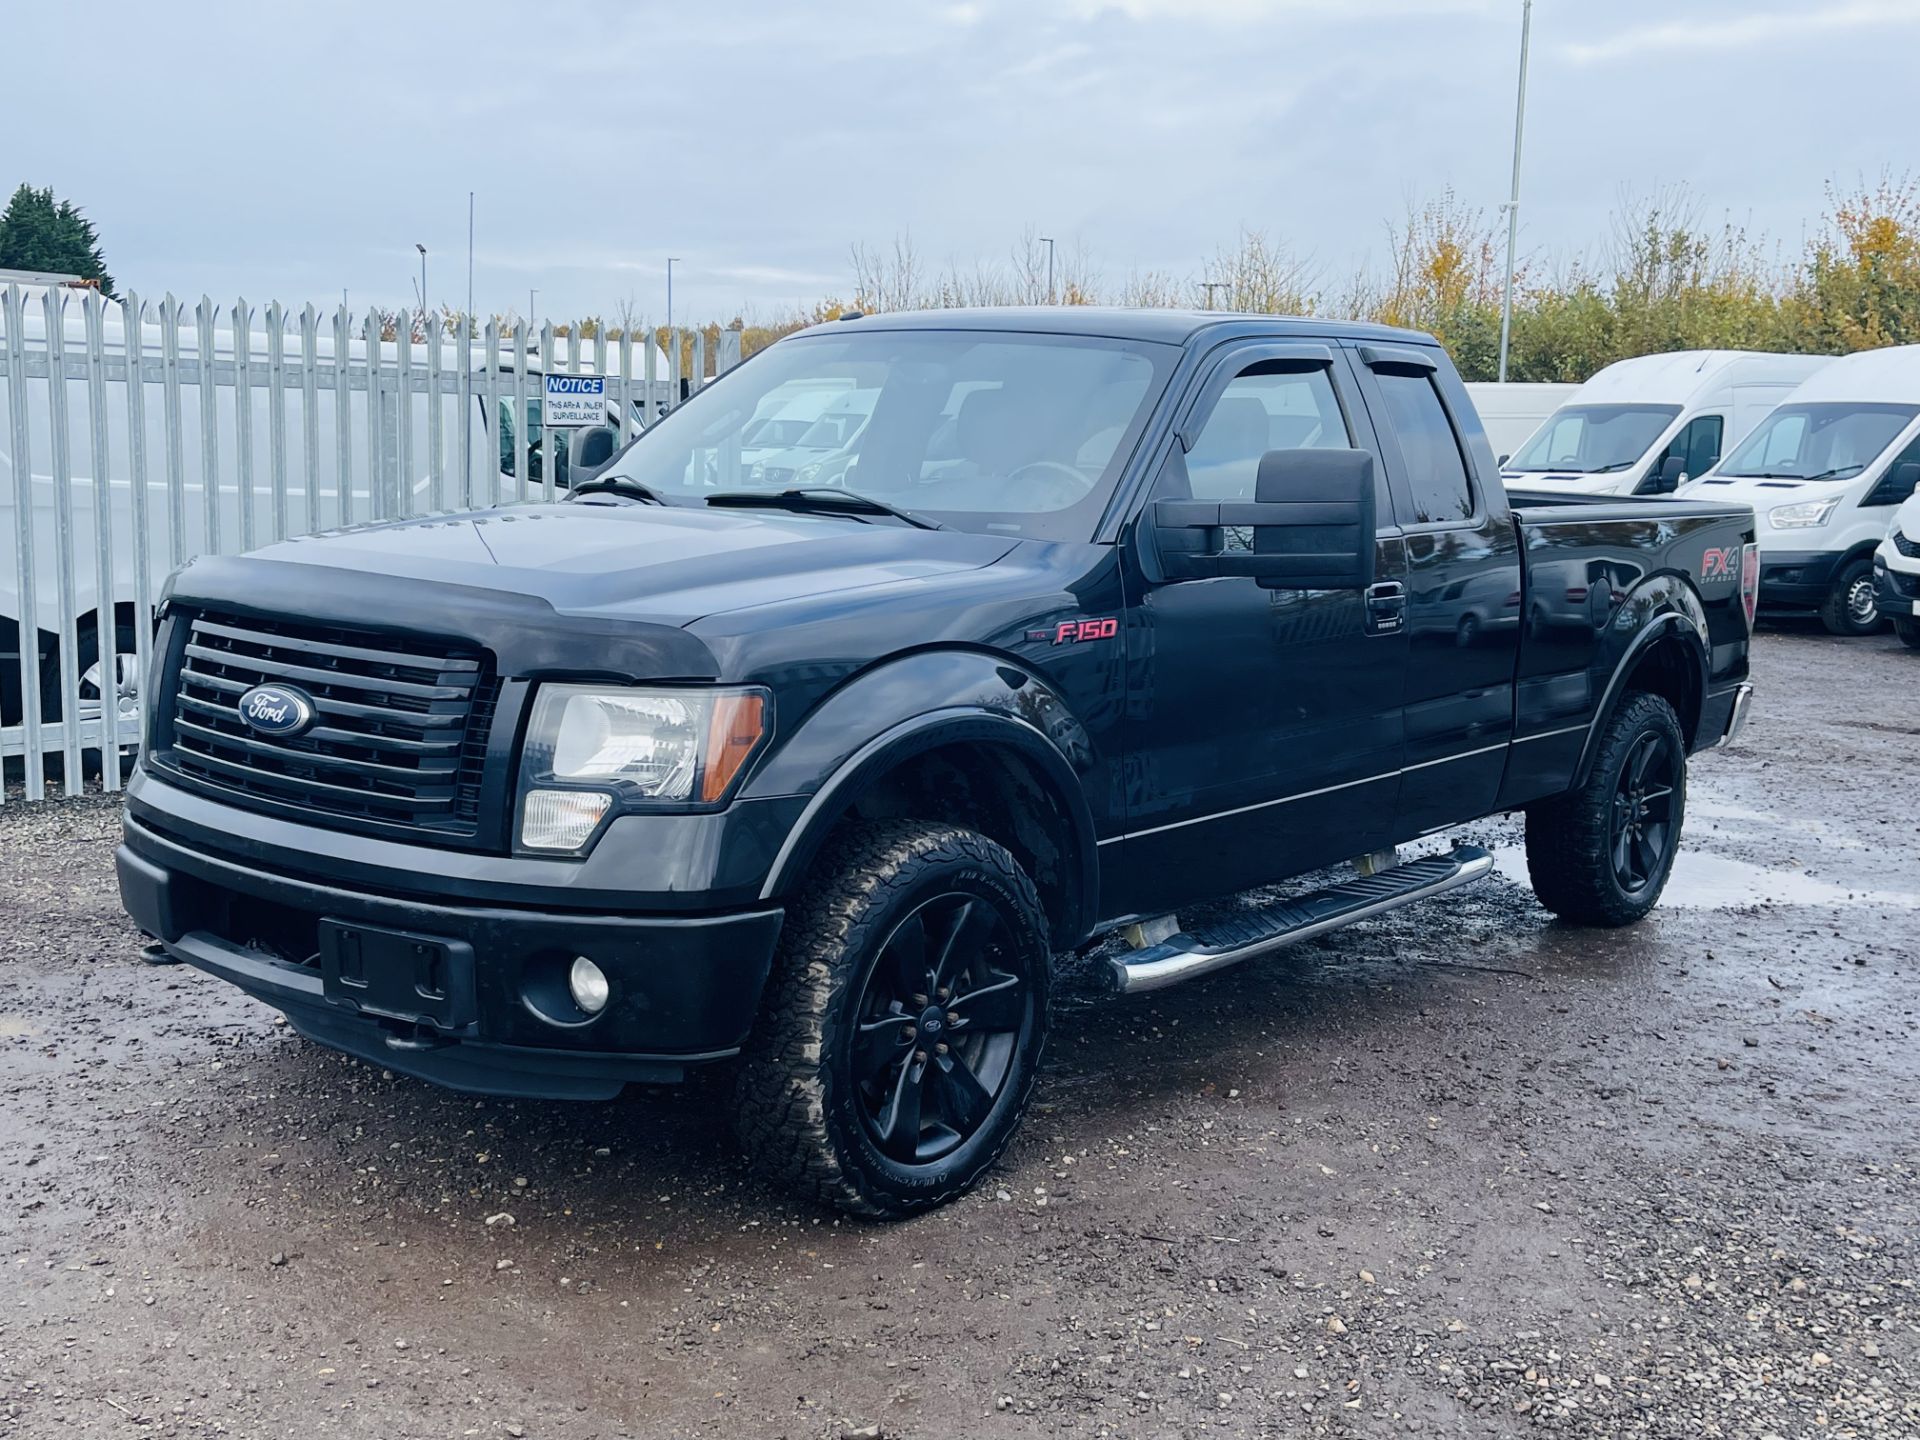 ** ON SALE ** Ford F-150 3.5L V6 SuperCab 4WD FX4 Edition '2012 Year' Colour Coded Package - FX4